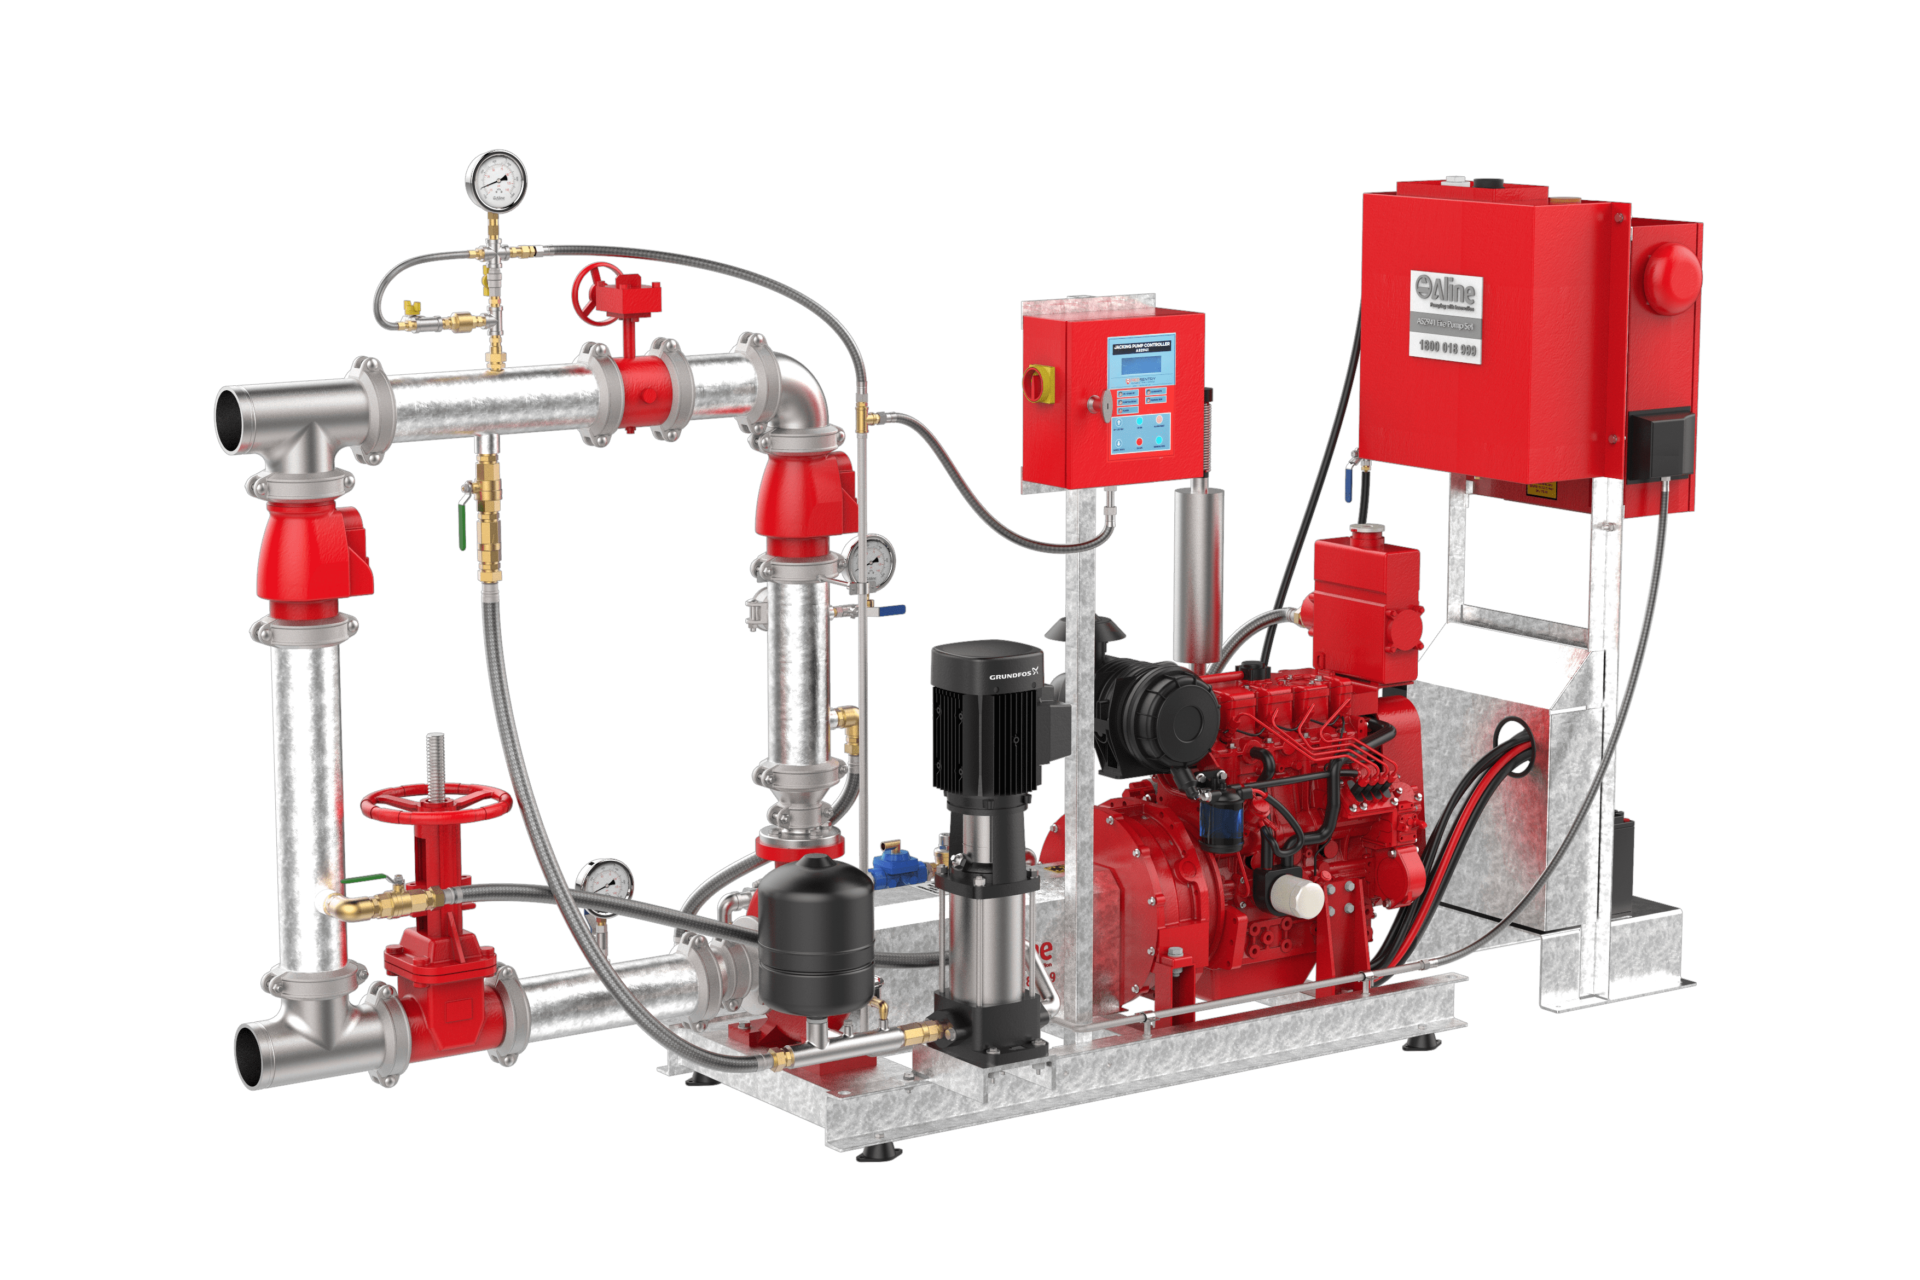 Single diesel fire pumpset, compact and efficient for fire protection